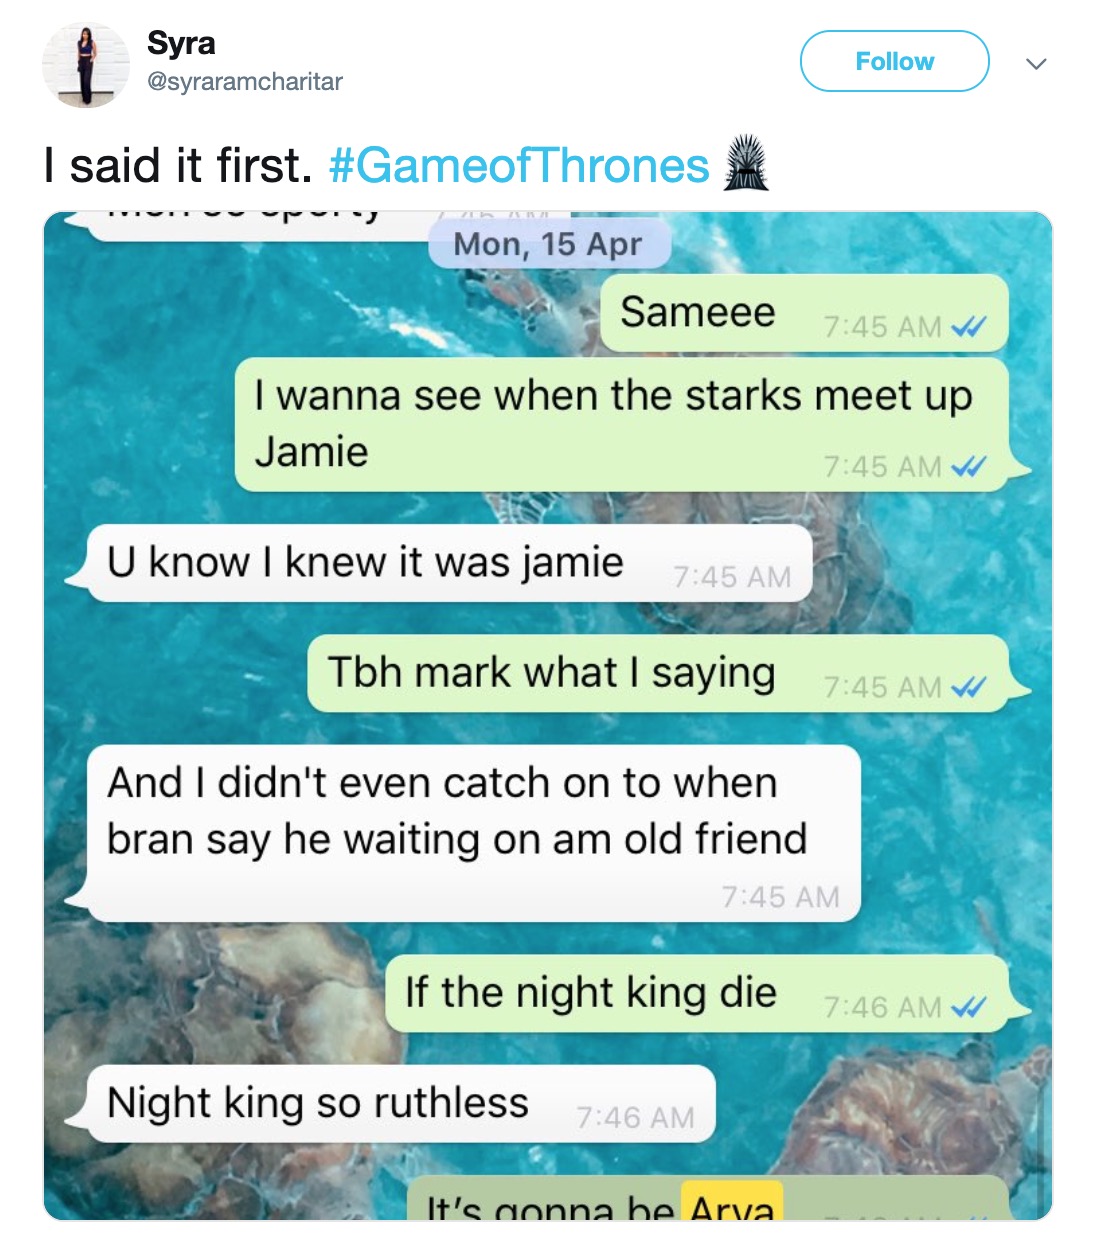 Game of Thrones memes - Battle for Winterfell - water resources - Syra v I said it first. hvorvi Mon, 15 Apr Sameee Vi I wanna see when the starks meet up Jamie W U know I knew it was jamie Tbh mark what I saying Va And I didn't even catch on to when bran